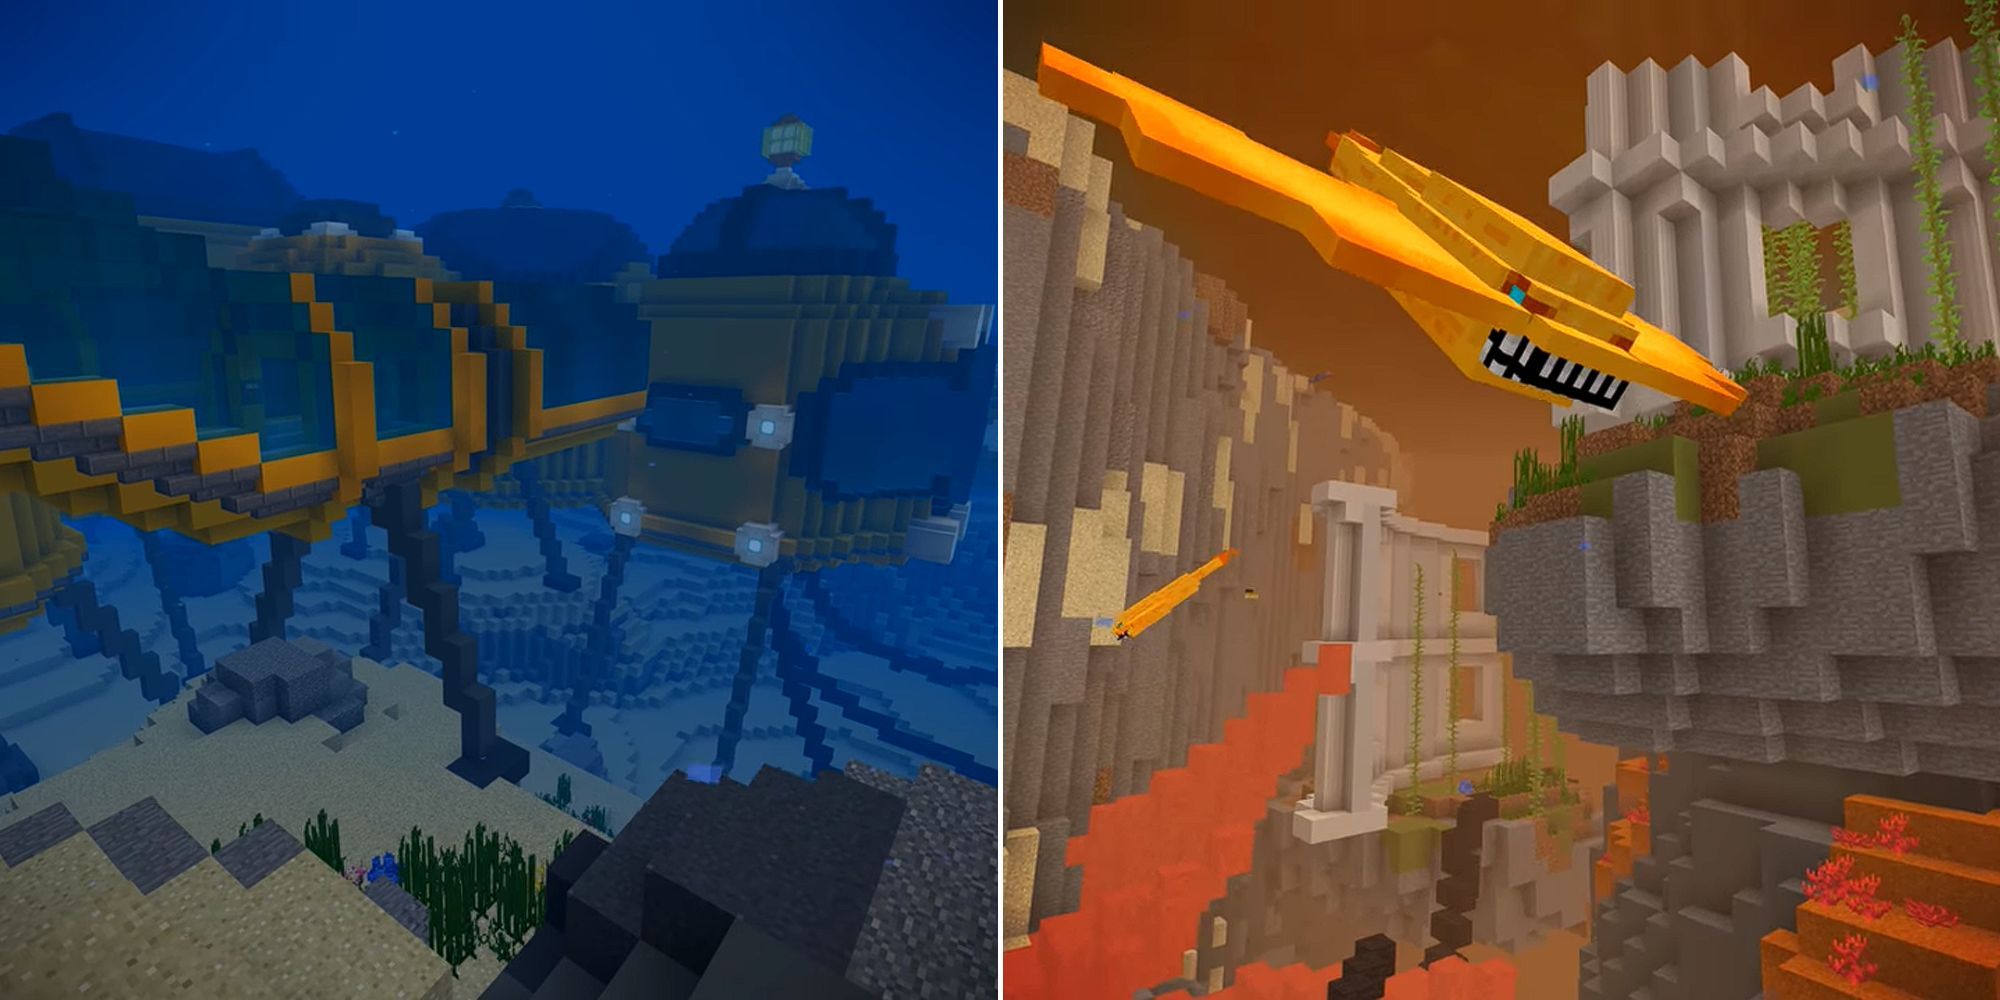 The underwater Facility and a stingray Monster in the Minecraft Monsters Of The Deep Map